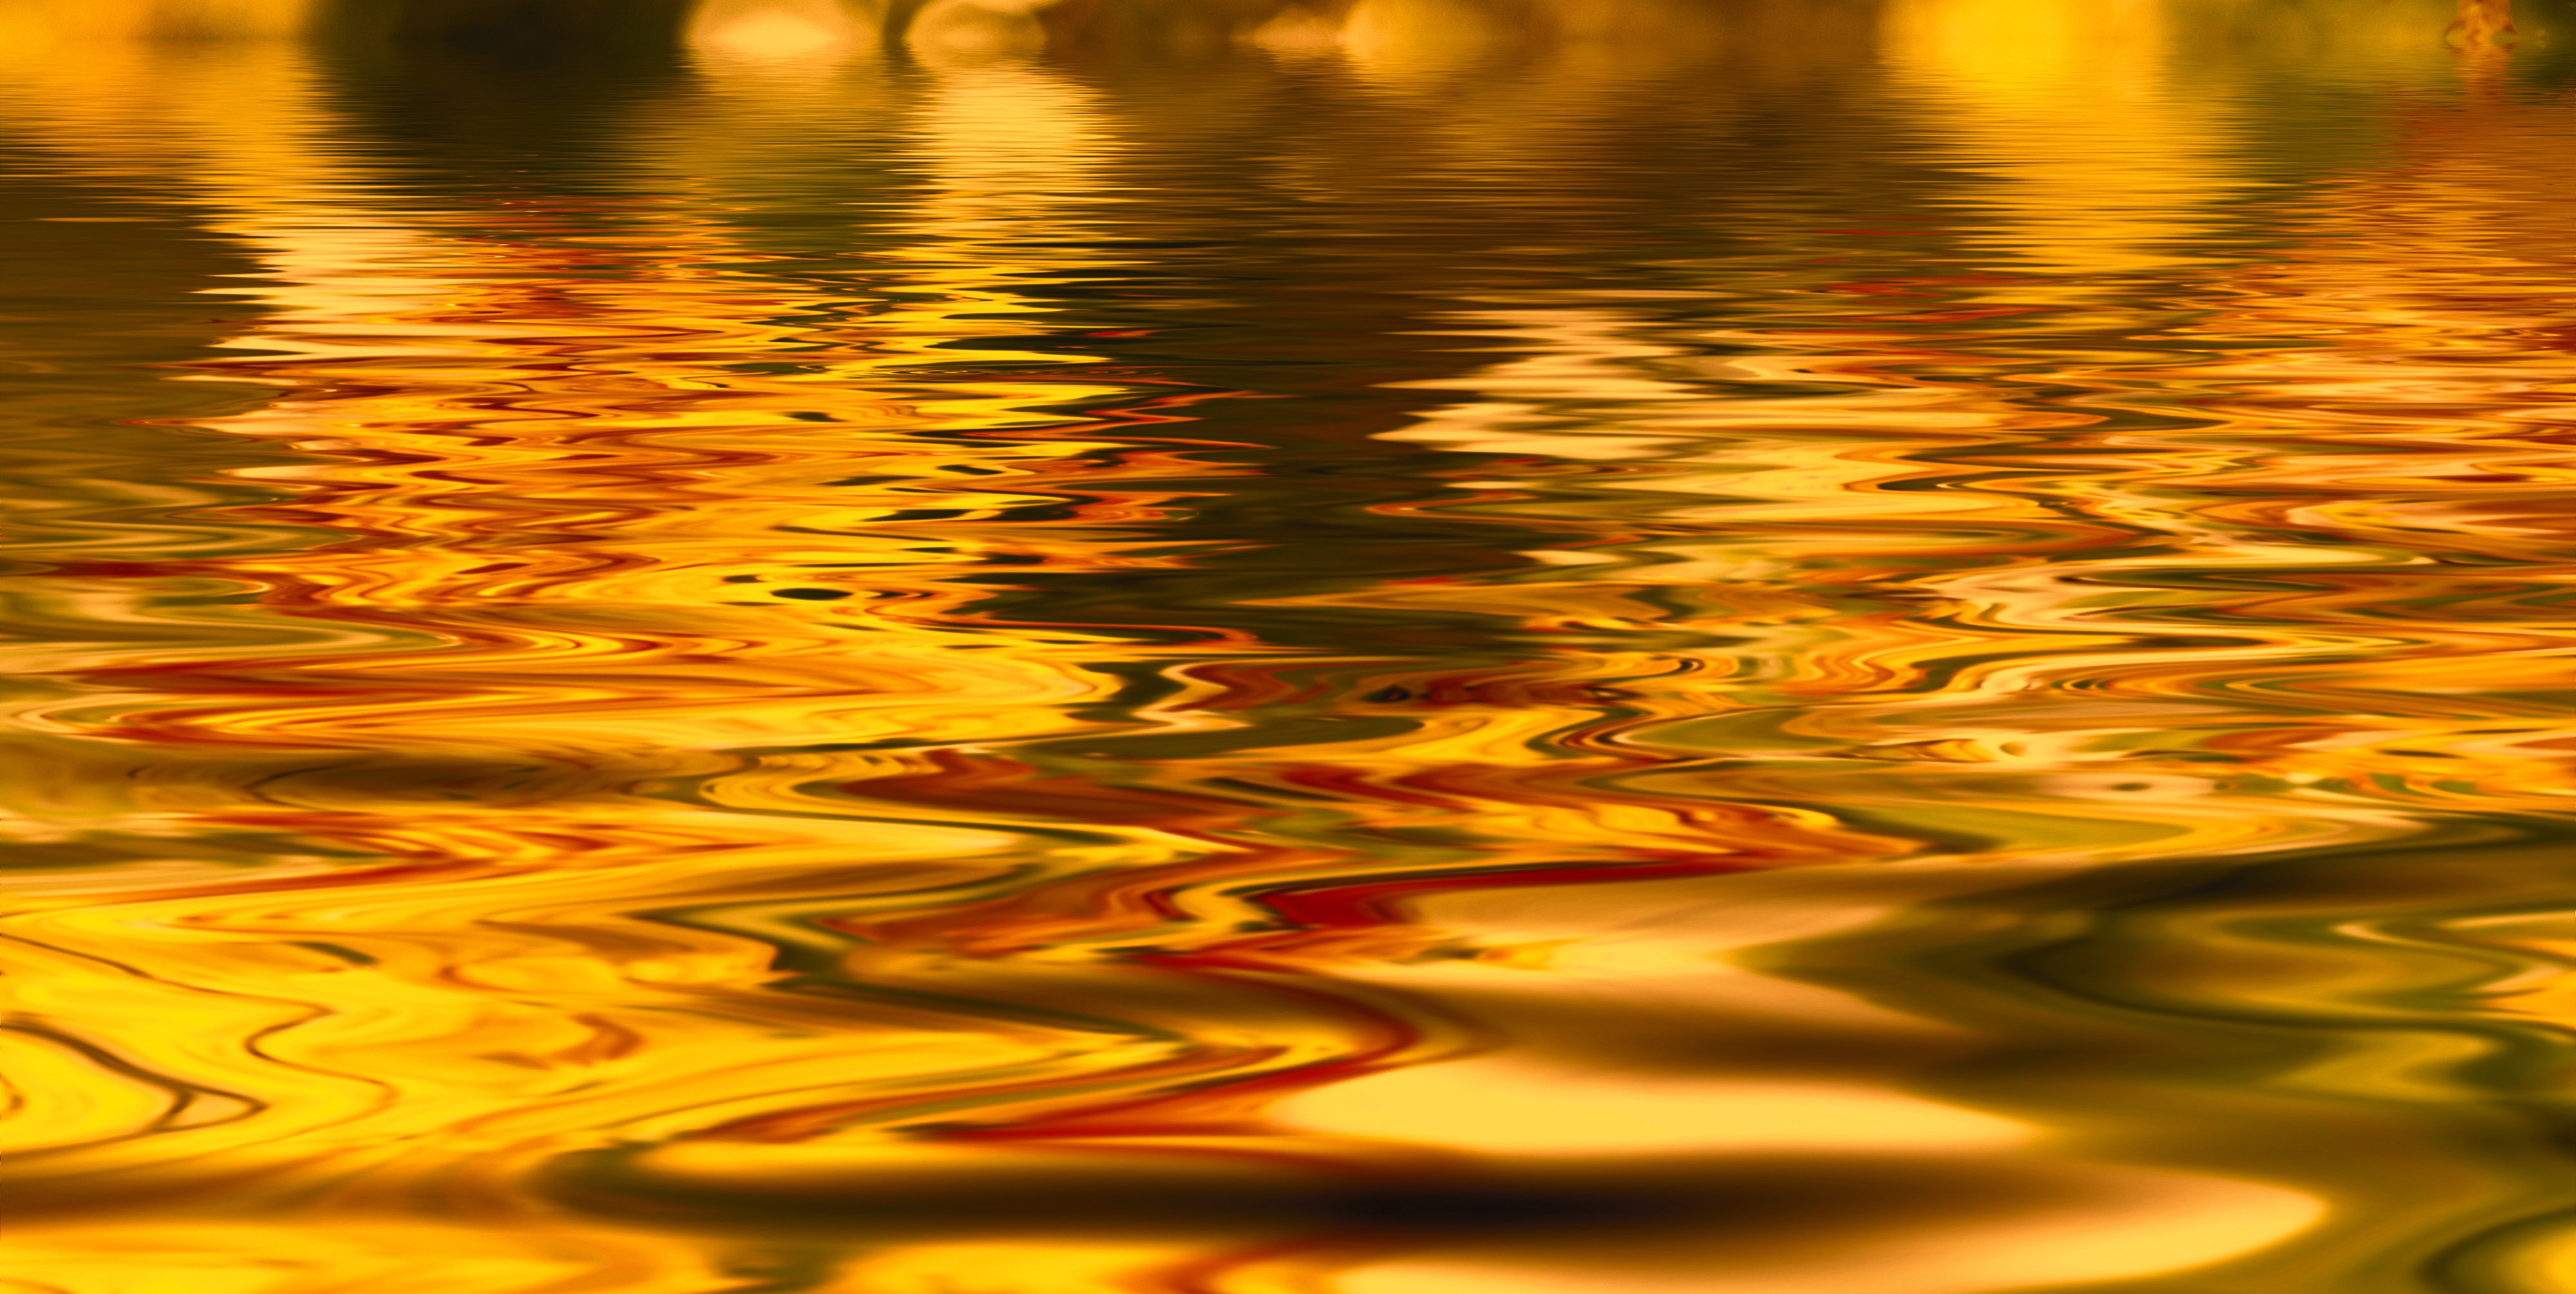 Background of Golden Water image - Free stock photo - Public Domain ...